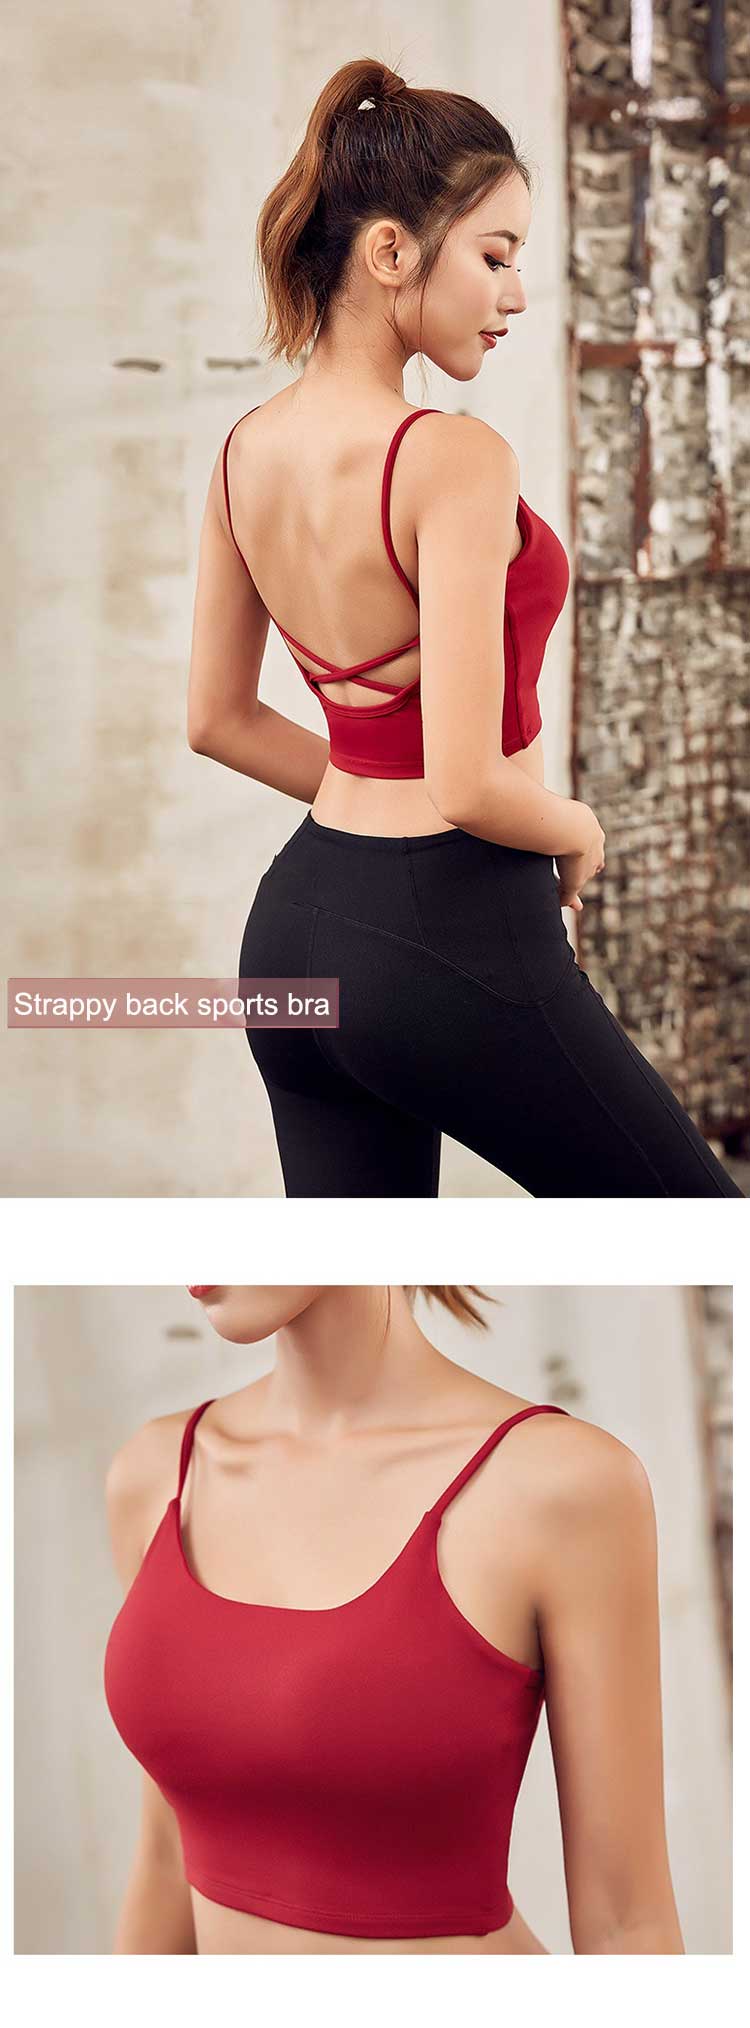 Strappy-back-sports-bra-is-designed-in-a-classic